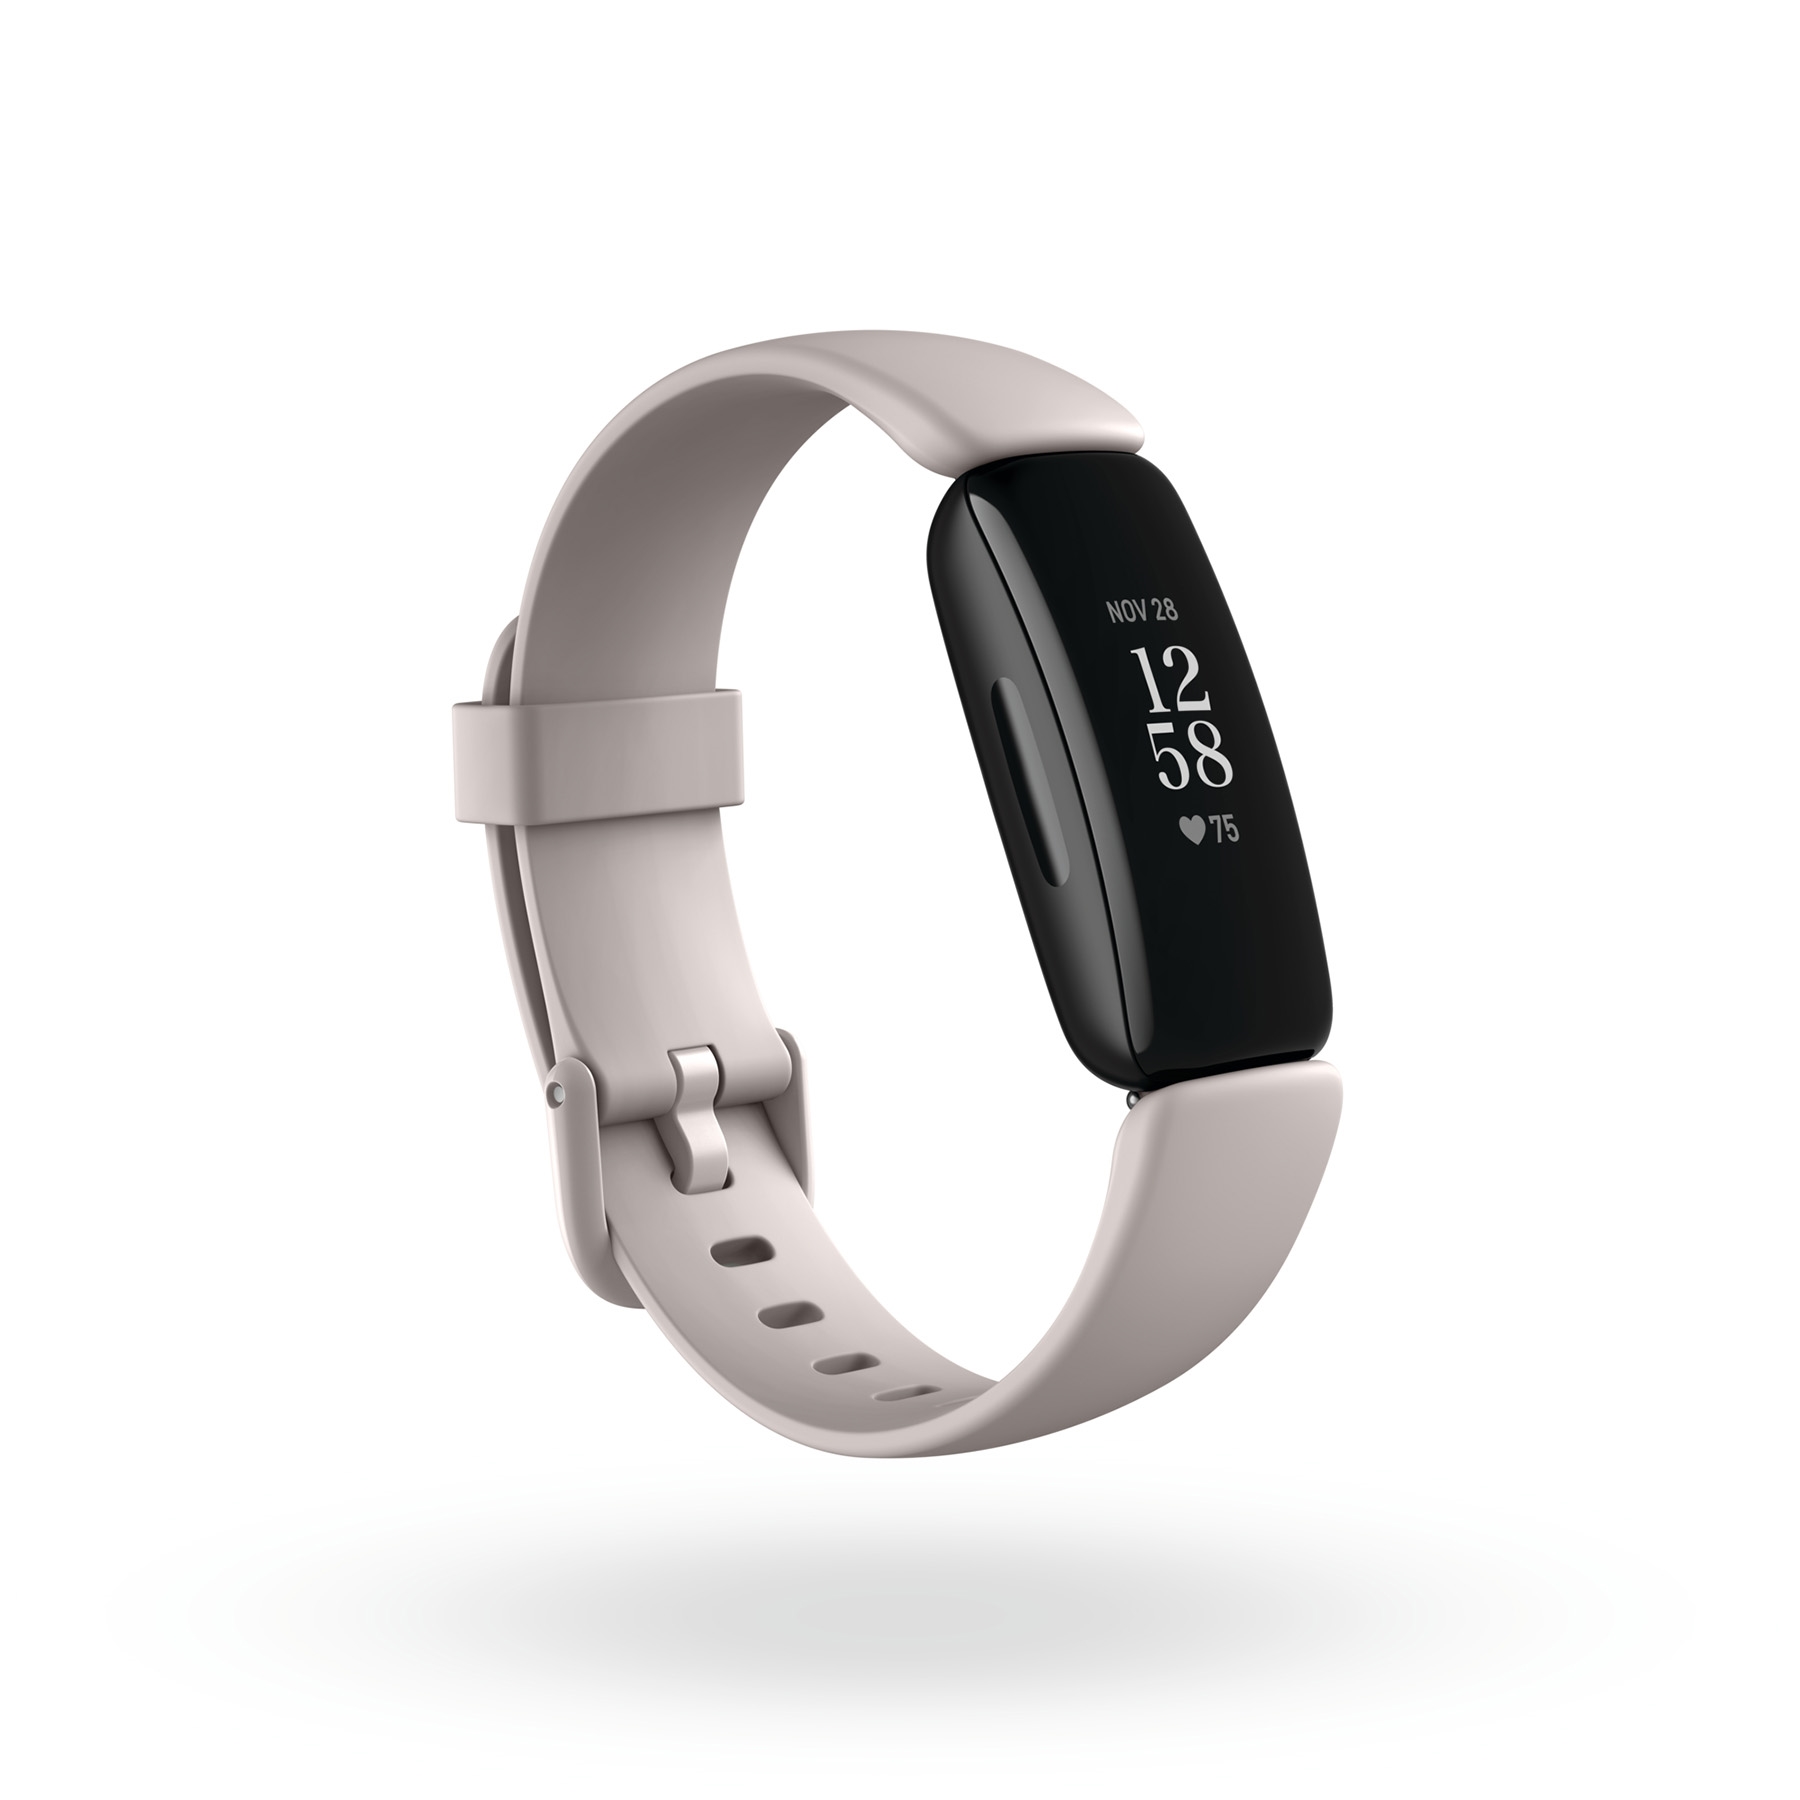 Fitbit Inspire 2 fitness tracker | DeviceDaily.com